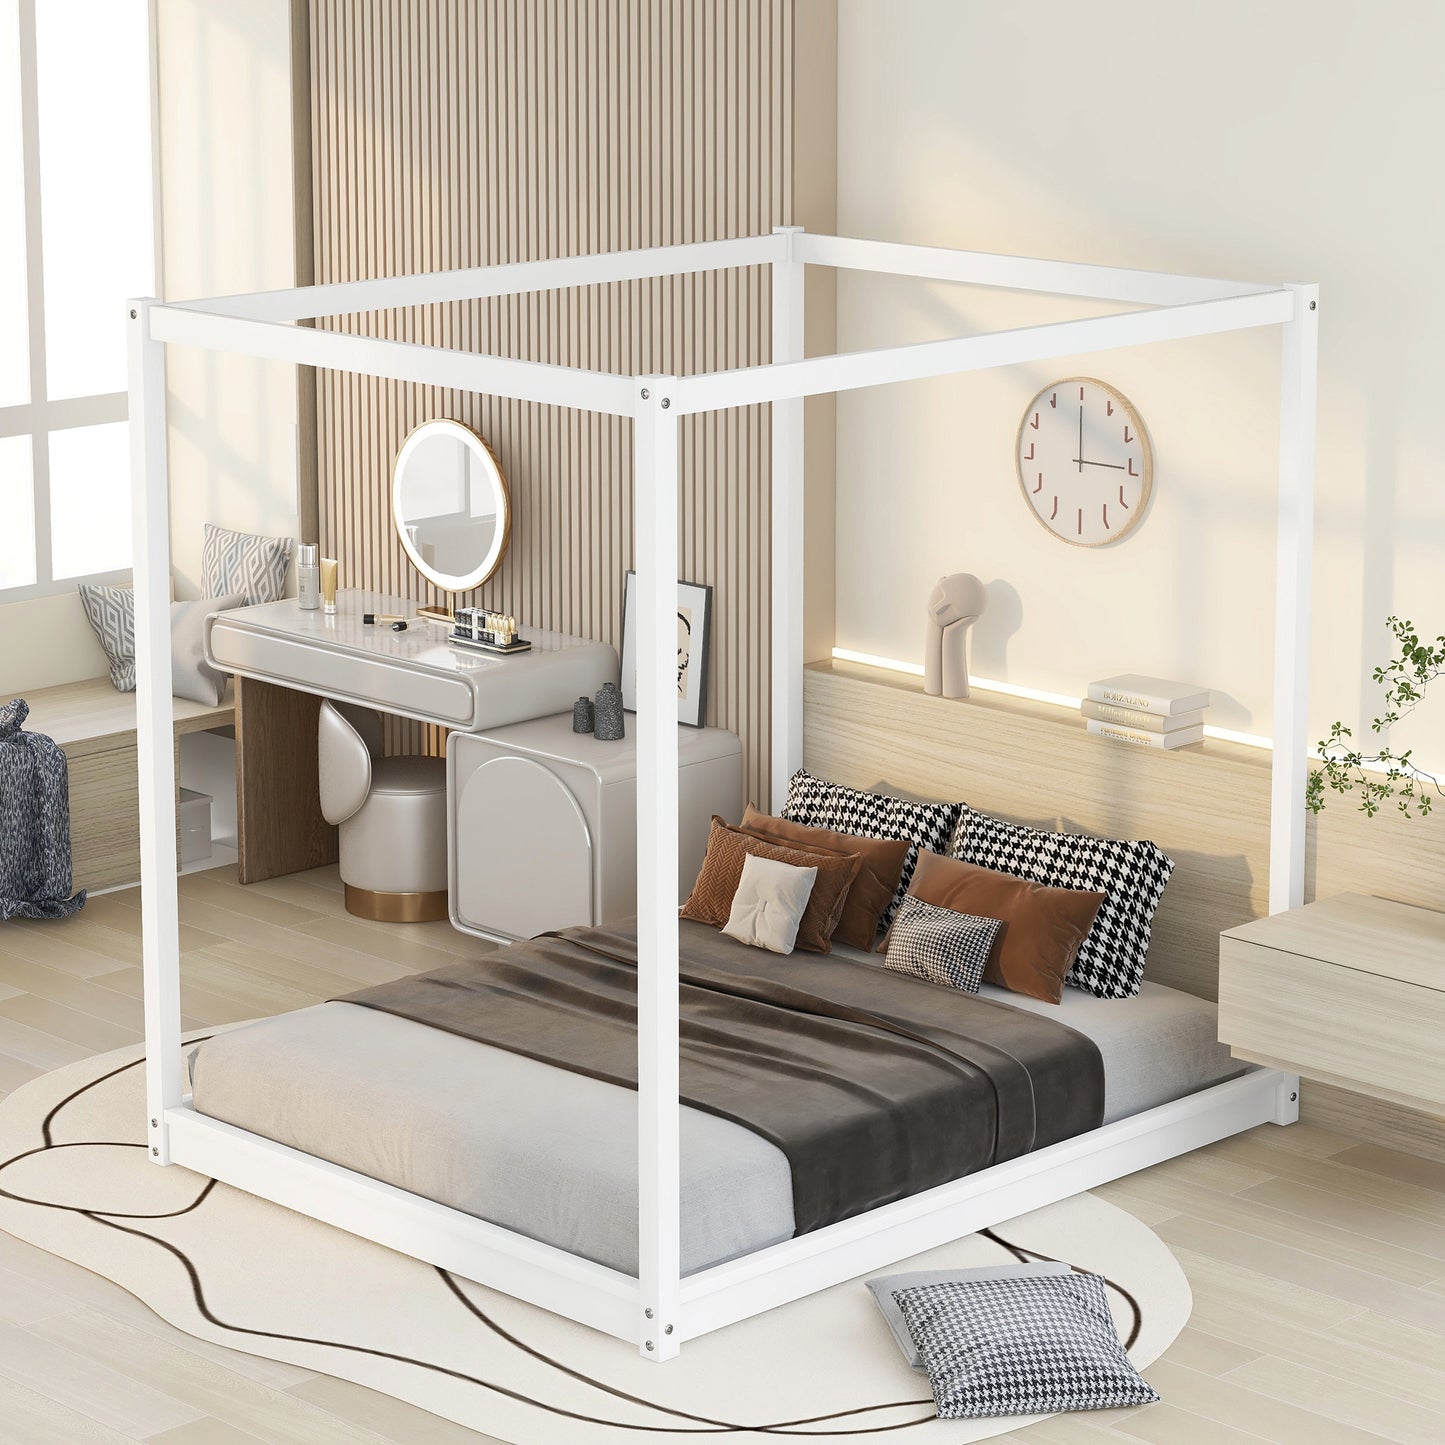 Queen Size Canopy Platform Bed with Support Legs,White